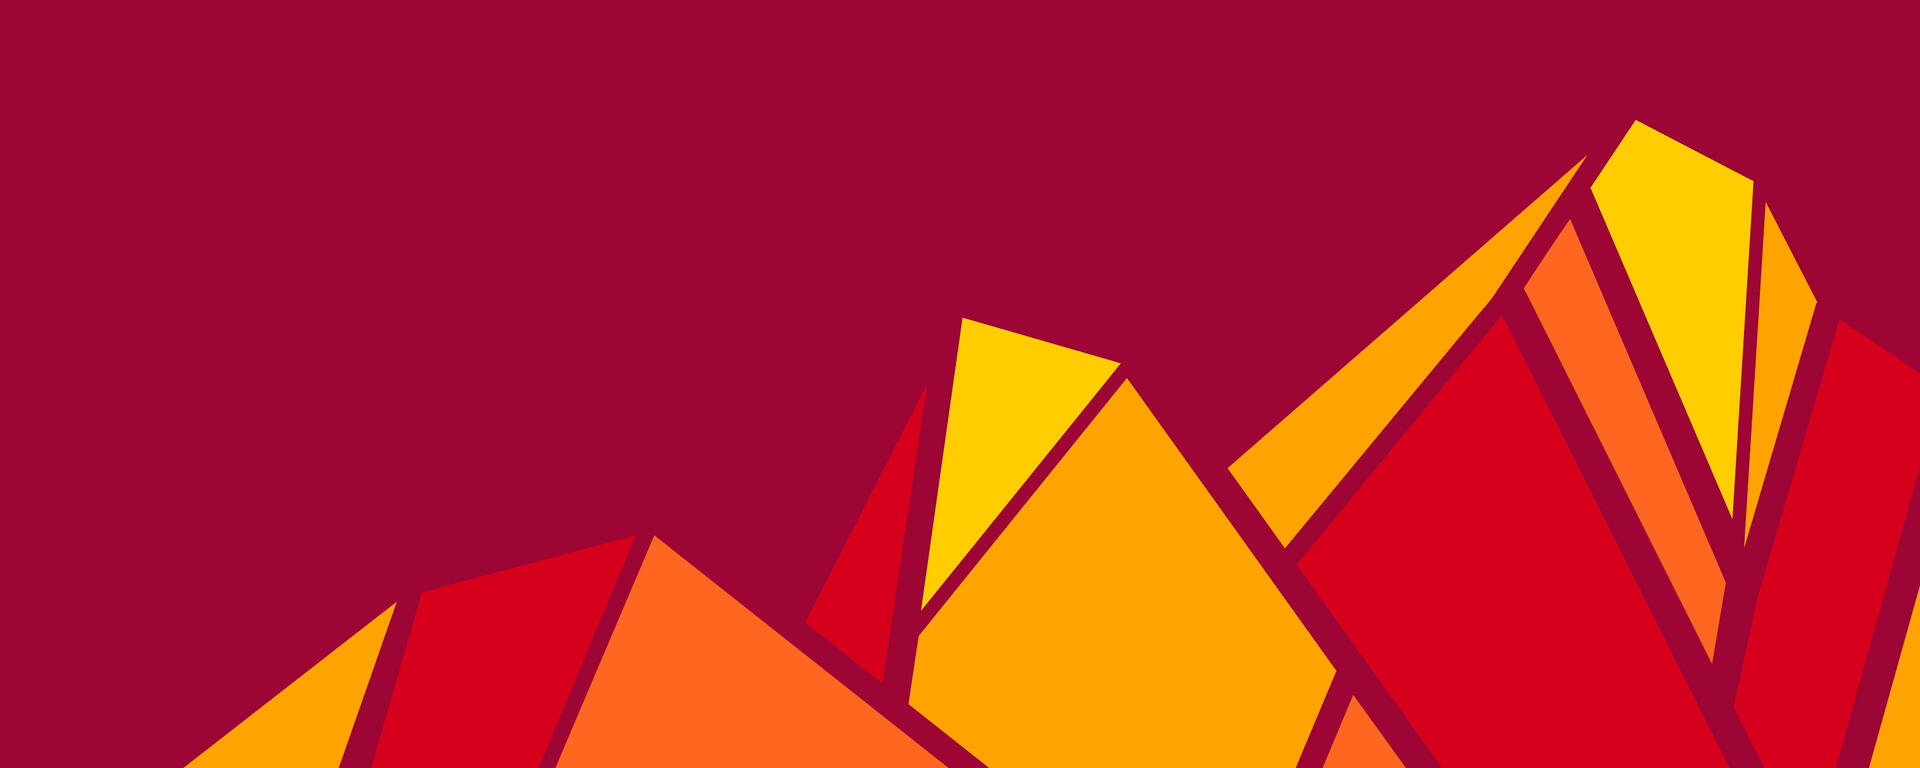 Geometric mountains in red and yellow